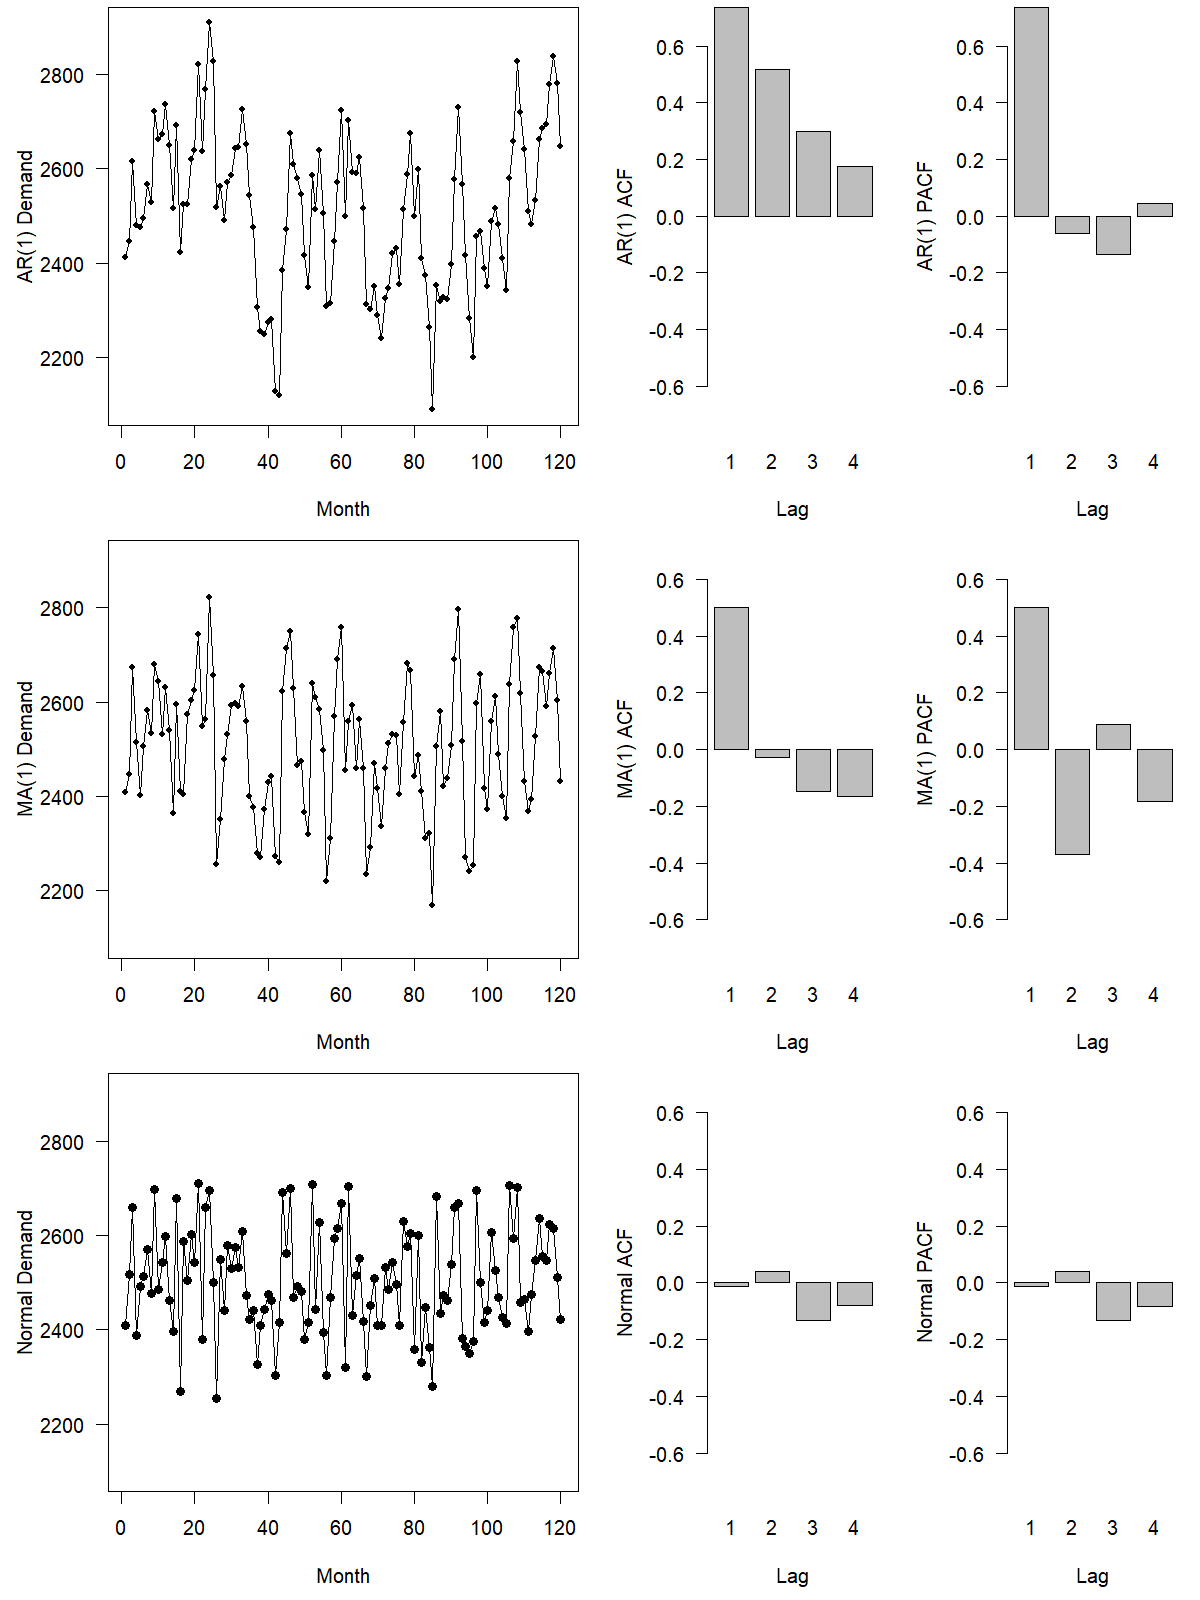 Nine panels in three rows. In each row, there is a time series plot on the left, with horizontal axes labeled "Month" and going from 1 to 120, and two barplots on the right, one plotting the autocorrelation function (ACF) and the other the partial autocorrelation function (PACF) for lags 1-4 for the time series in the leftmost panel. All plots in the right two columns have vertical axes going from -0.6 to 0.6. In the top row, the time series is an autoregressive process of order 1. The ACF drops linearly, and the PACF is large for lag 1 and almost zero for larger lags. In the second row, the time series is a moving average process of order 1. The ACF is large for lag 1 and almost zero for larger lags, and the PACF oscillates with decreasing amplitude as lags increase. In the third row, the time series is Normal, and both the ACF and the PACF are almost zero.